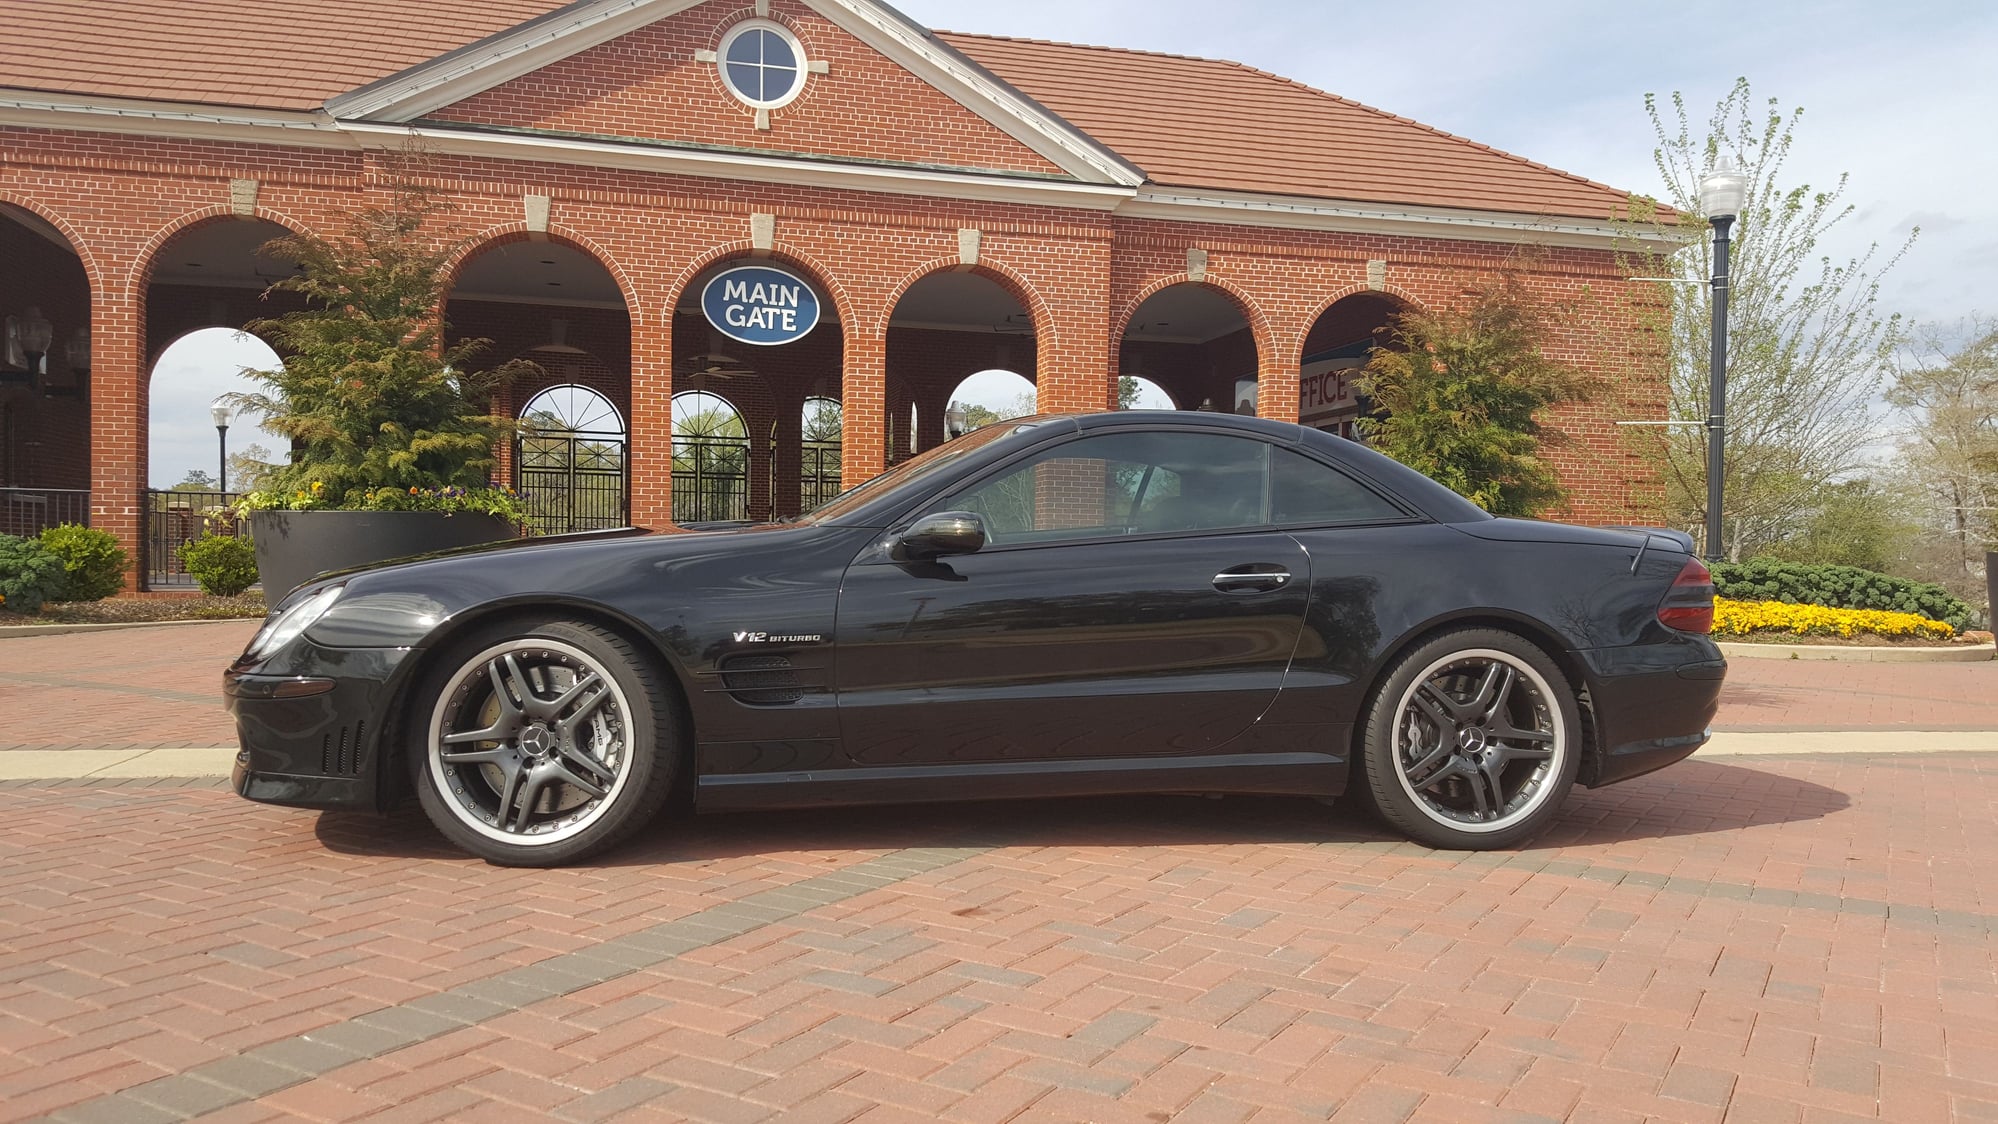 2006 Mercedes-Benz SL65 AMG - Super nice, low mile SL65 AMG - Used - VIN WDBSK79F06F109503 - 32,664 Miles - 12 cyl - 2WD - Automatic - Convertible - Black - Lagrange, GA 30240, United States